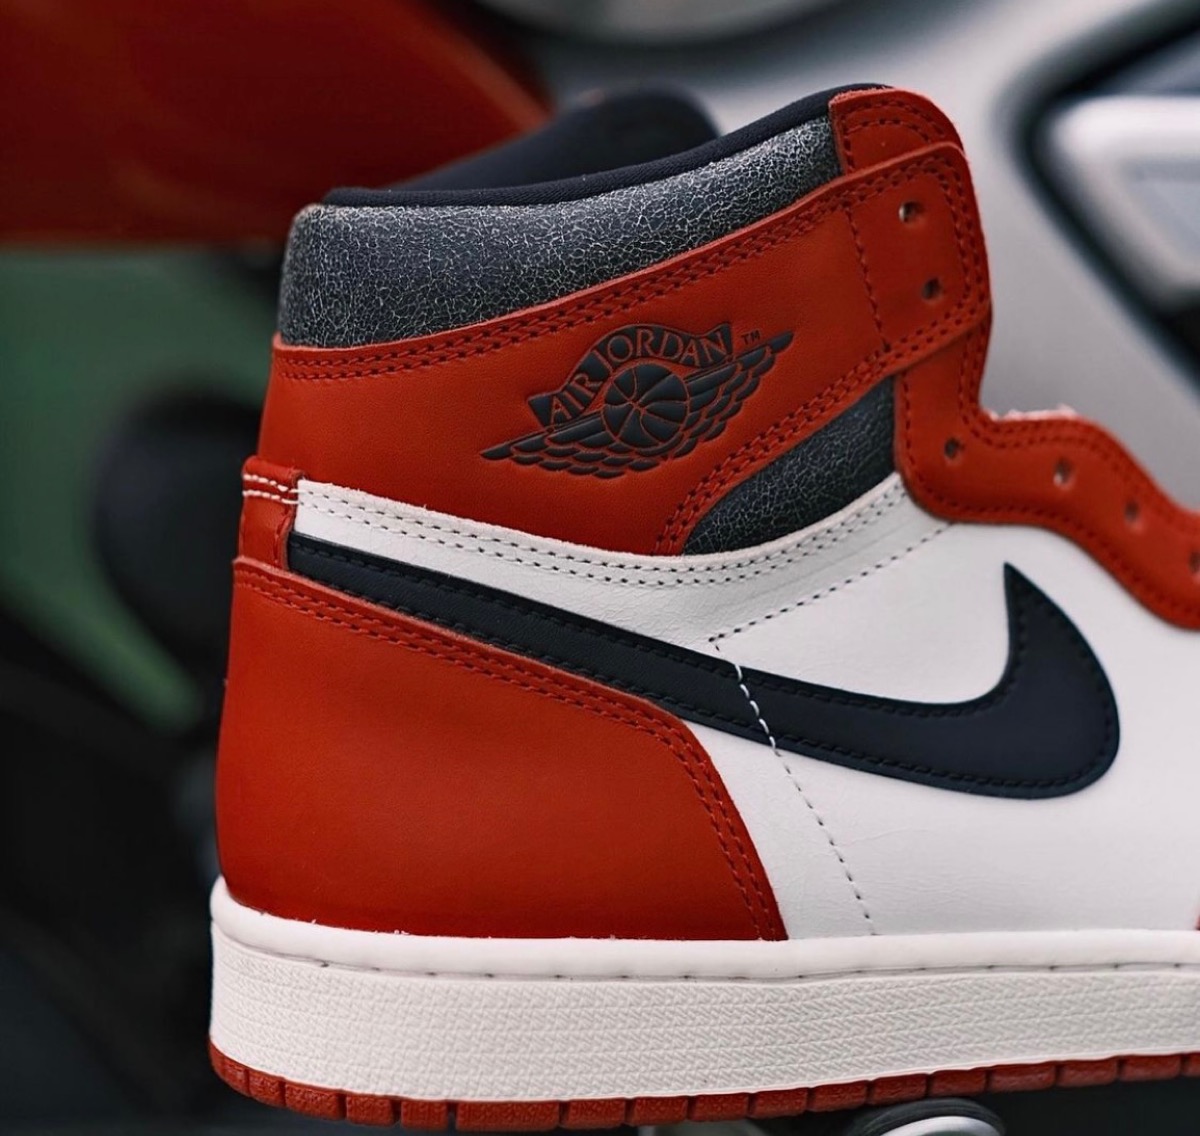 Chicagoをヴィンテージ風に仕上げたNike Air Jordan 1 High OG “Lost and Found”が国内11月19日に発売予定  | UP TO DATE